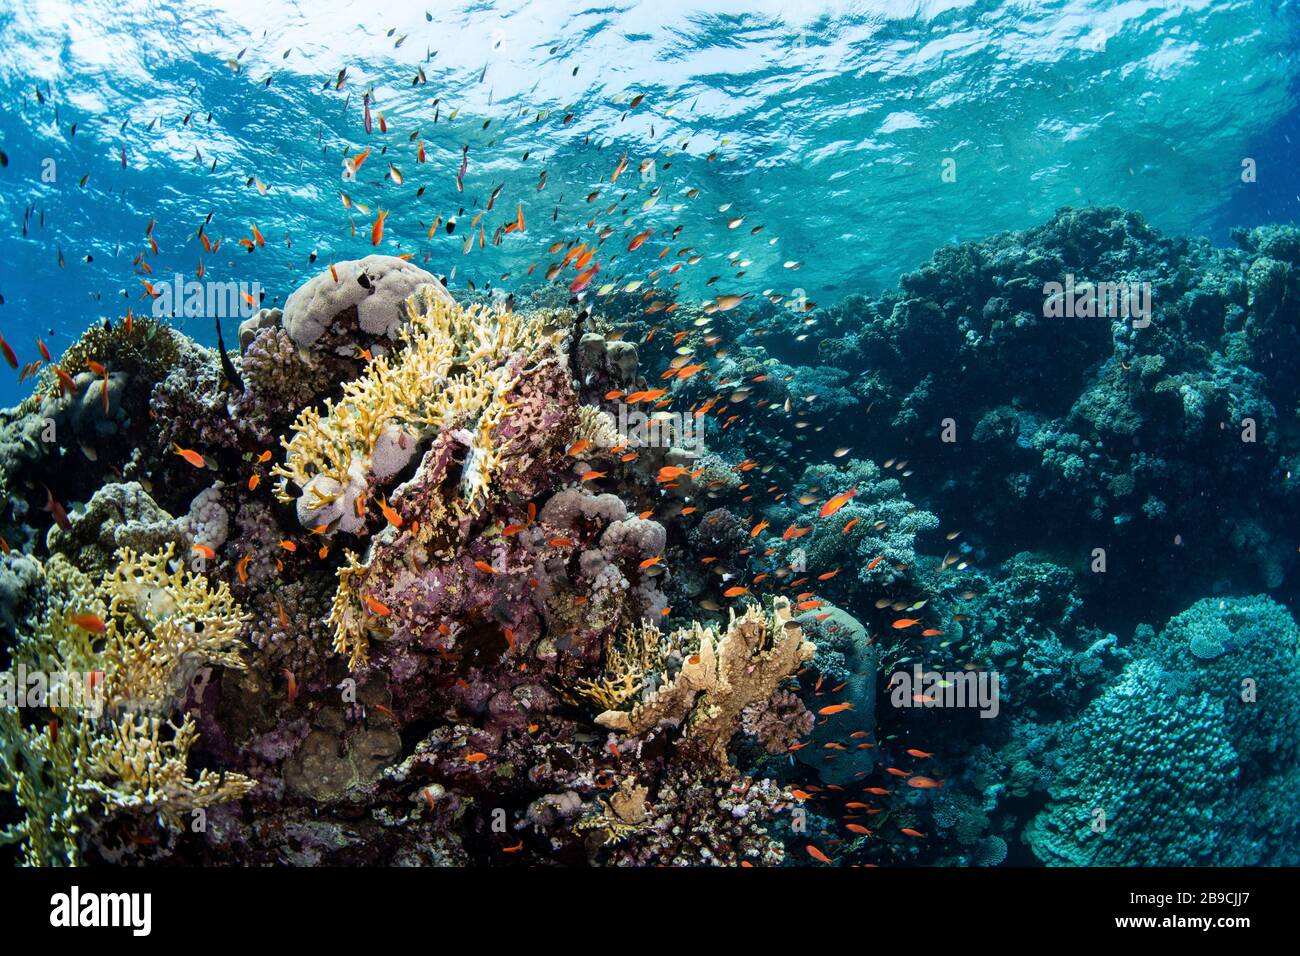 Anthias swarm around a coral reef in the Red Sea, Red Sea. Stock Photo